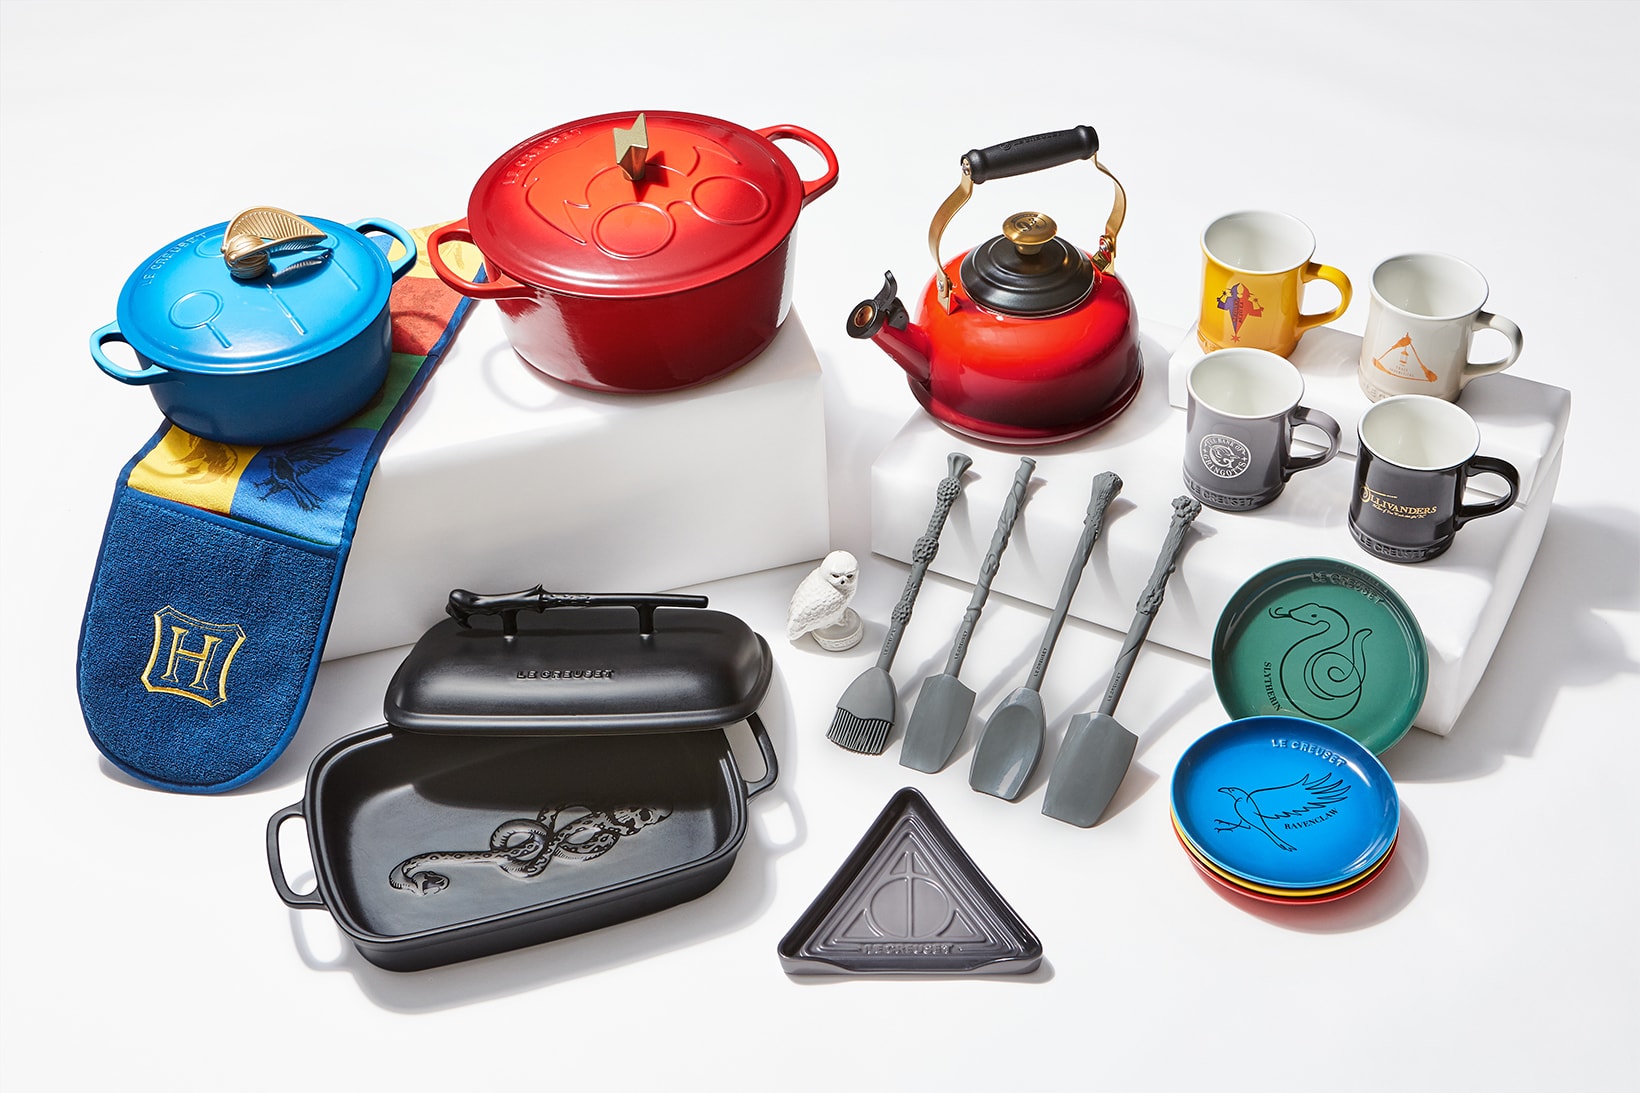 https://image-cdn.hypb.st/https%3A%2F%2Fhypebeast.com%2Fwp-content%2Fblogs.dir%2F6%2Ffiles%2F2021%2F11%2Fle-creuset-harry-potter-kitchenware-collaboration-dutch-oven-pots-kettle-mugs-plates-release-where-to-buy-1.jpg?cbr=1&q=90